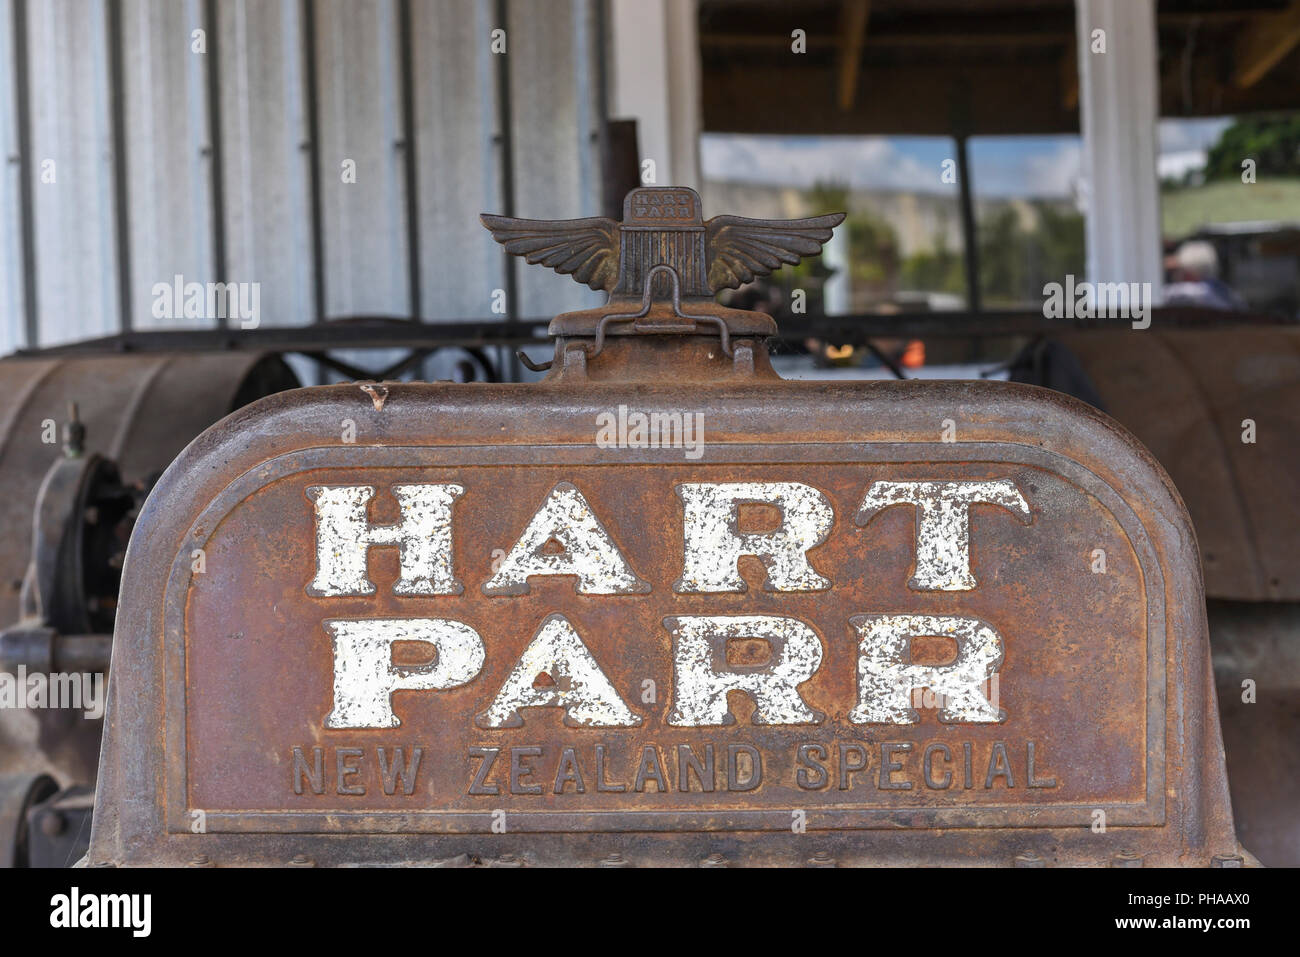 Old Hart Parr tractor at the Geraldine Transport and Machinery Museum, Canterbury, New Zealand Stock Photo